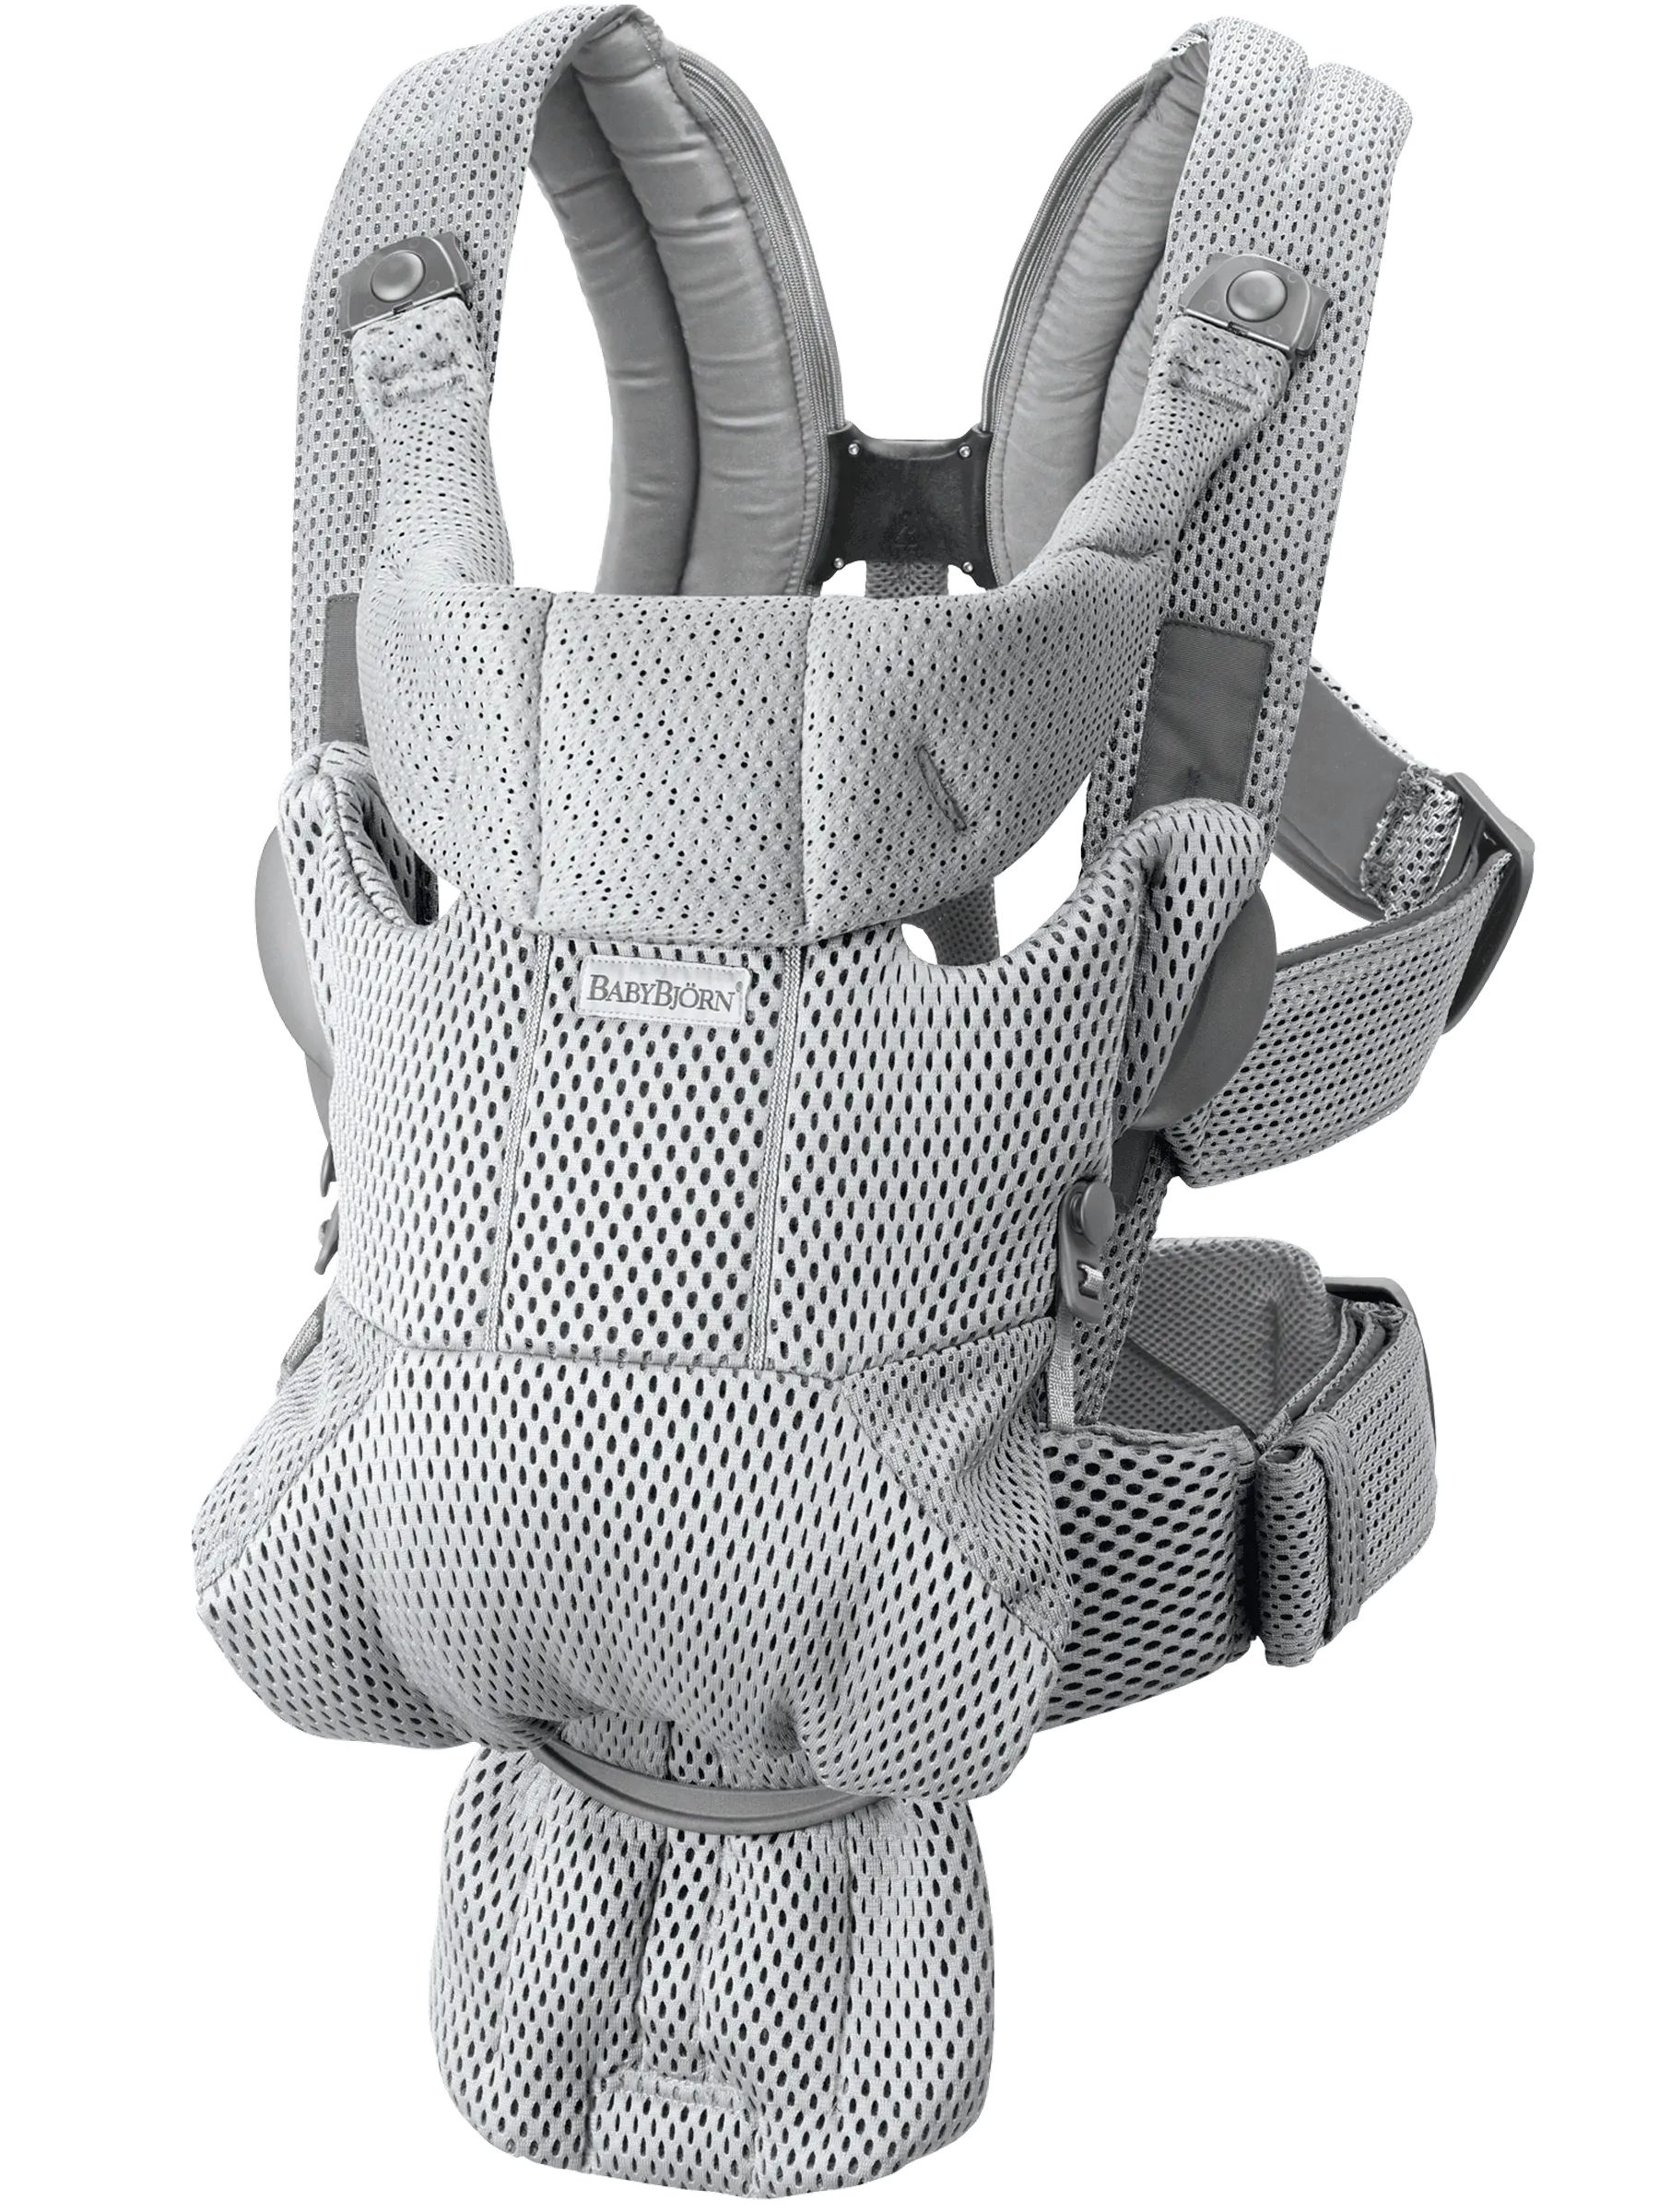 Baby Carrier Free | BabyBjorn